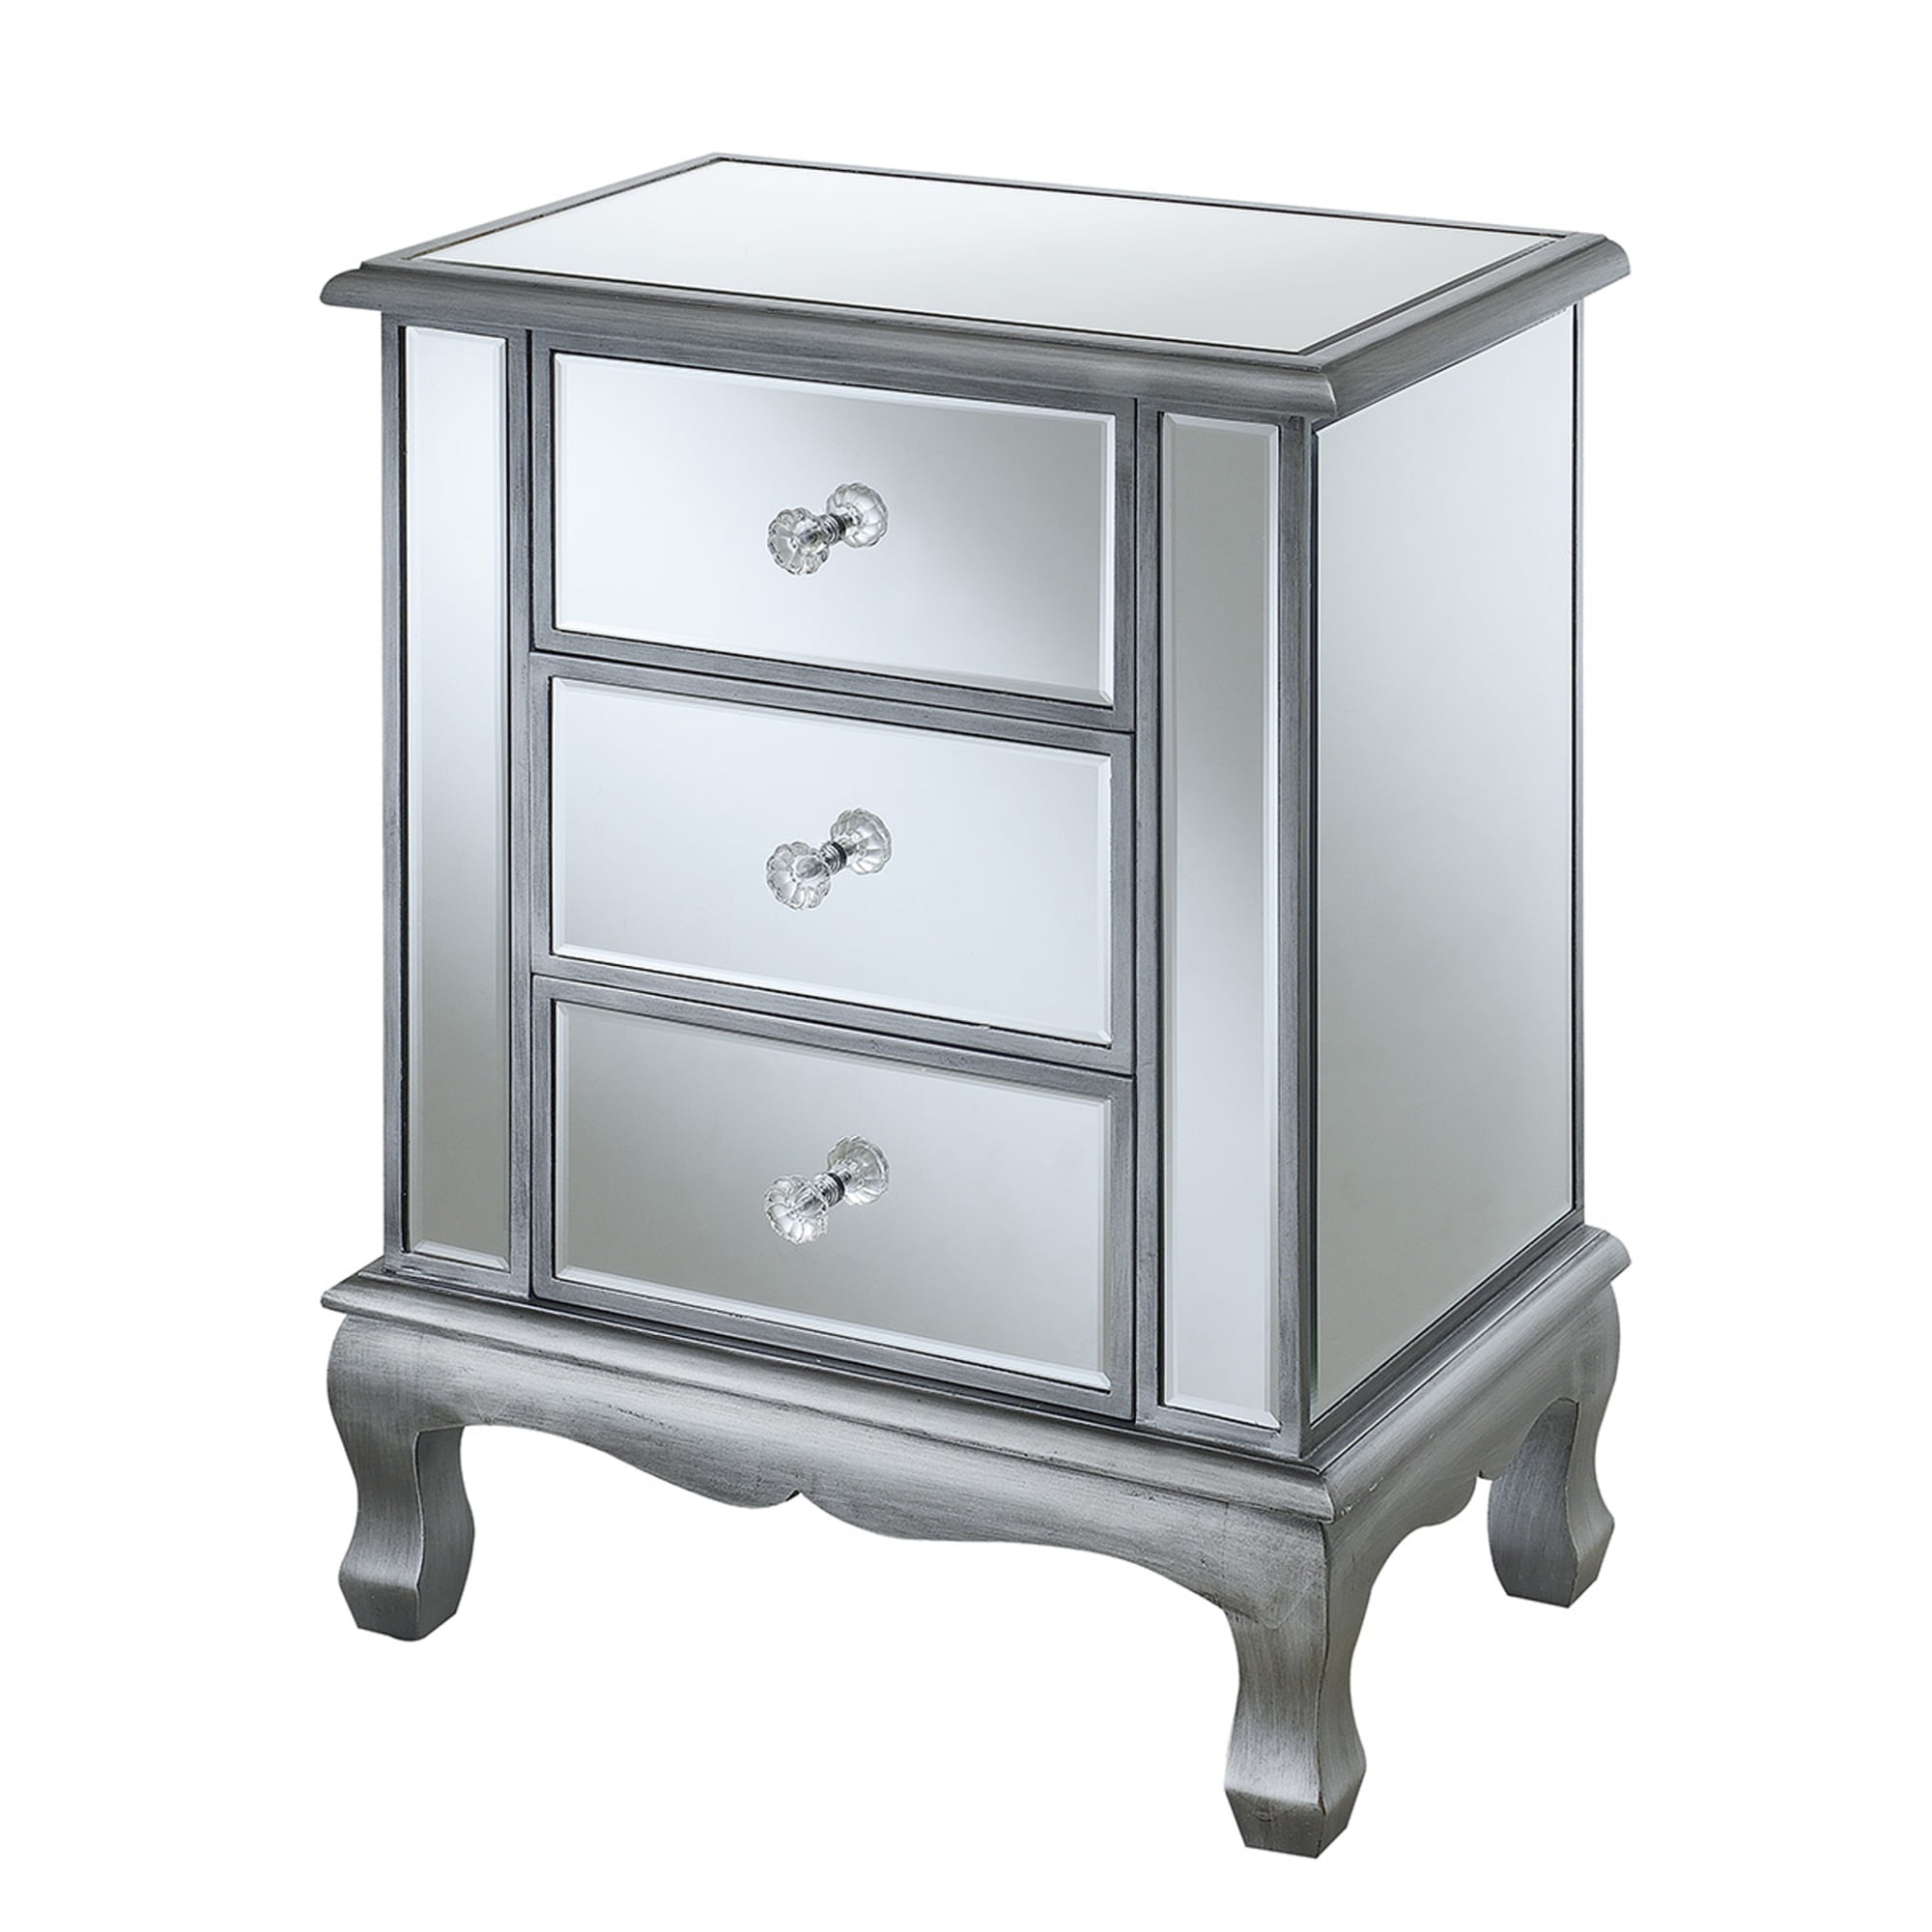 Weathered White Gold Coast 3 Drawer Mirrored End Table U12-163 Mirror Finish 